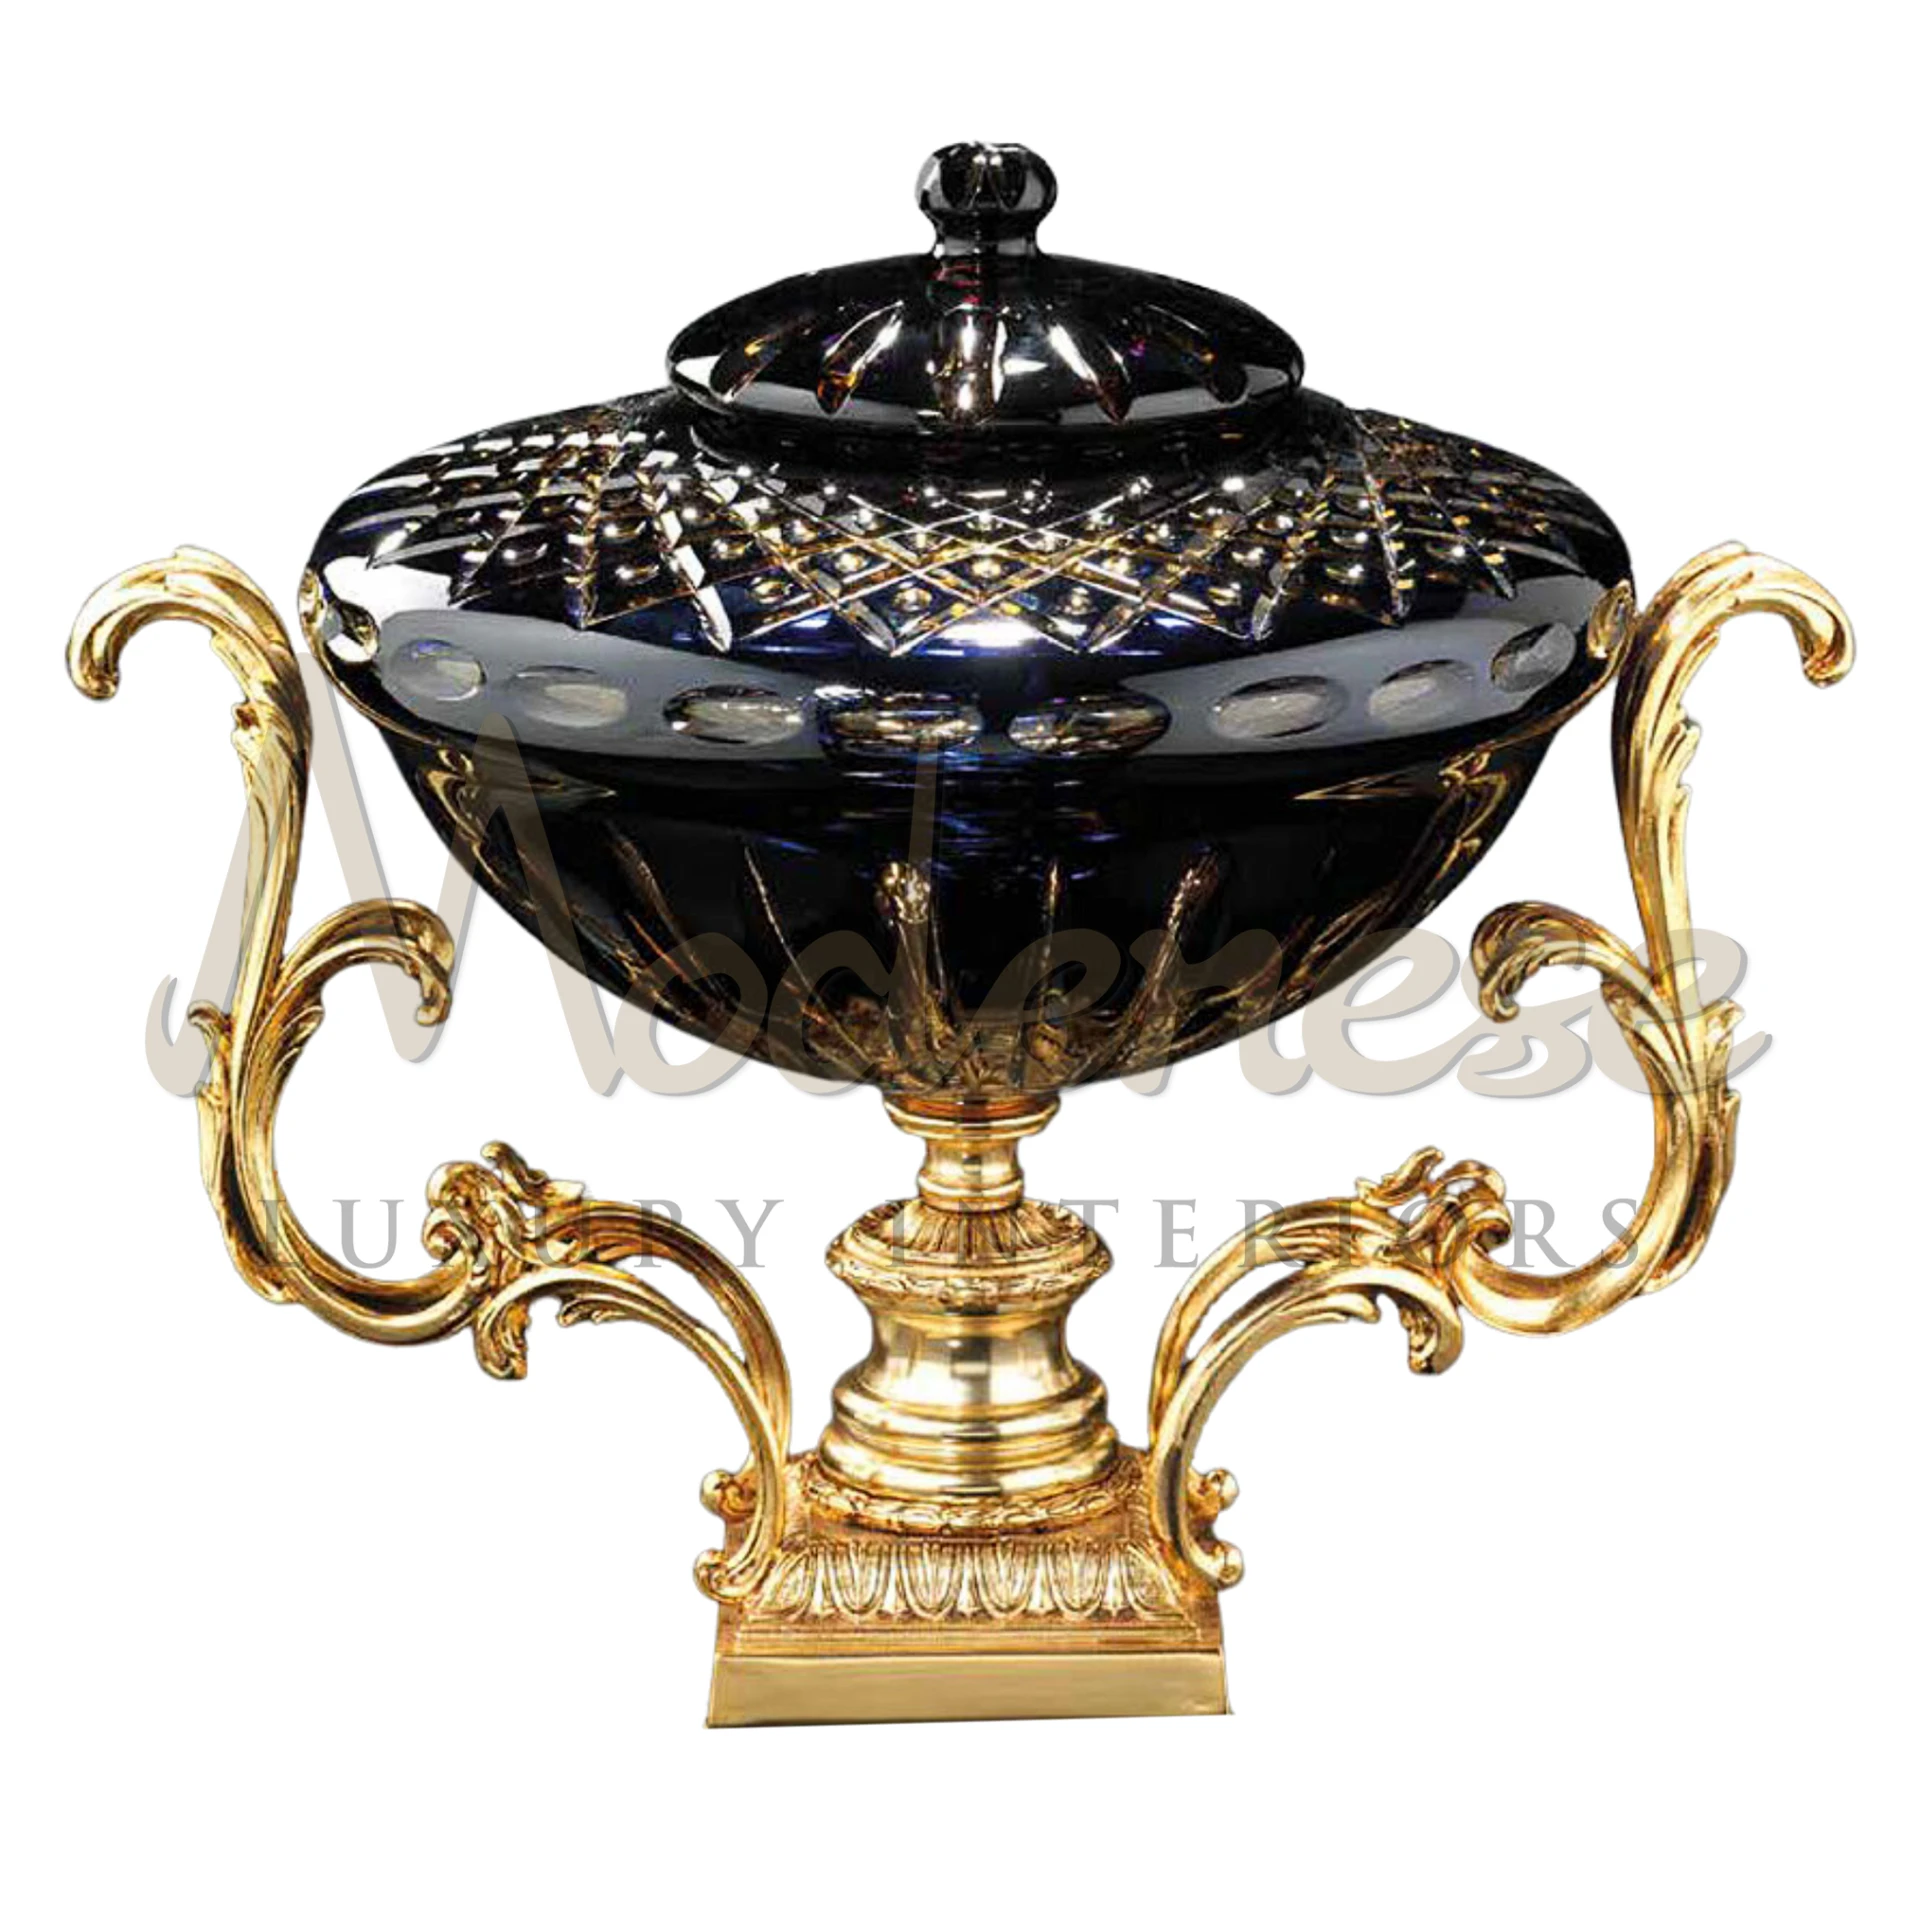 Luxurious Royal Black Vase by Modenese Furniture, blending traditional elegance with high-quality craftsmanship for classic interiors.